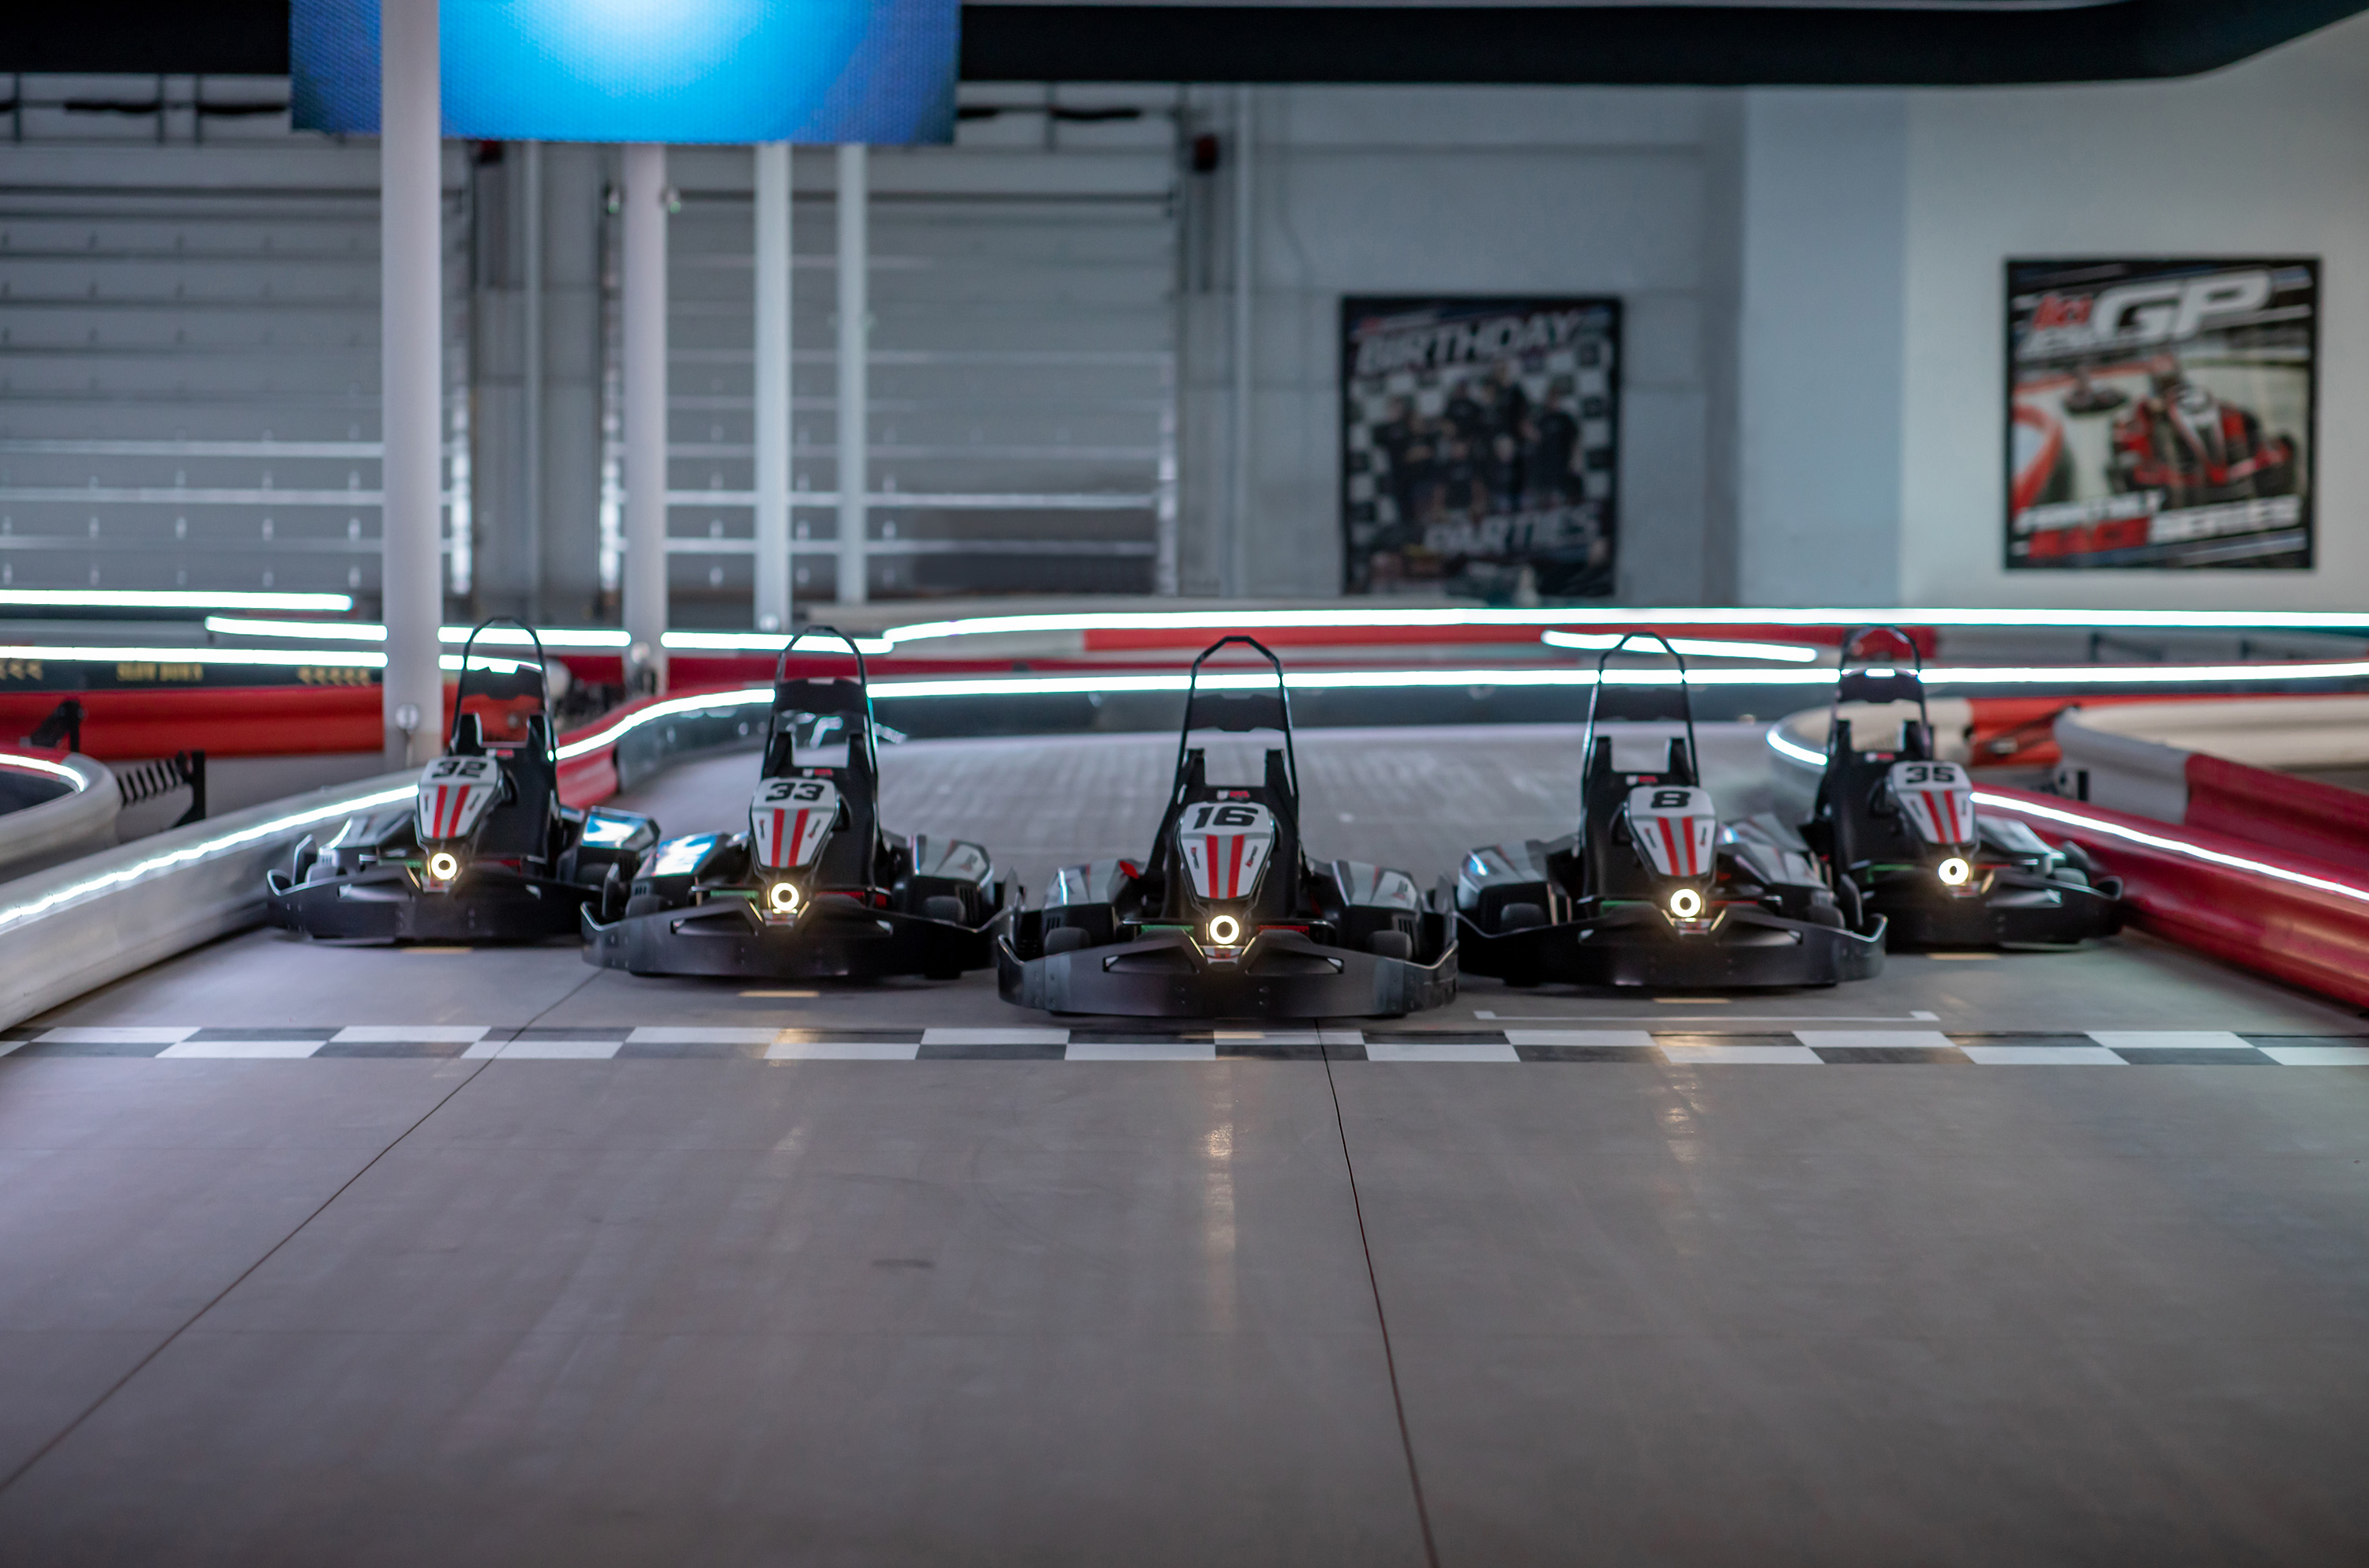 K1 Speed Expands To Ohio Opens First Indoor Outdoor Go Kart Track In Canton 